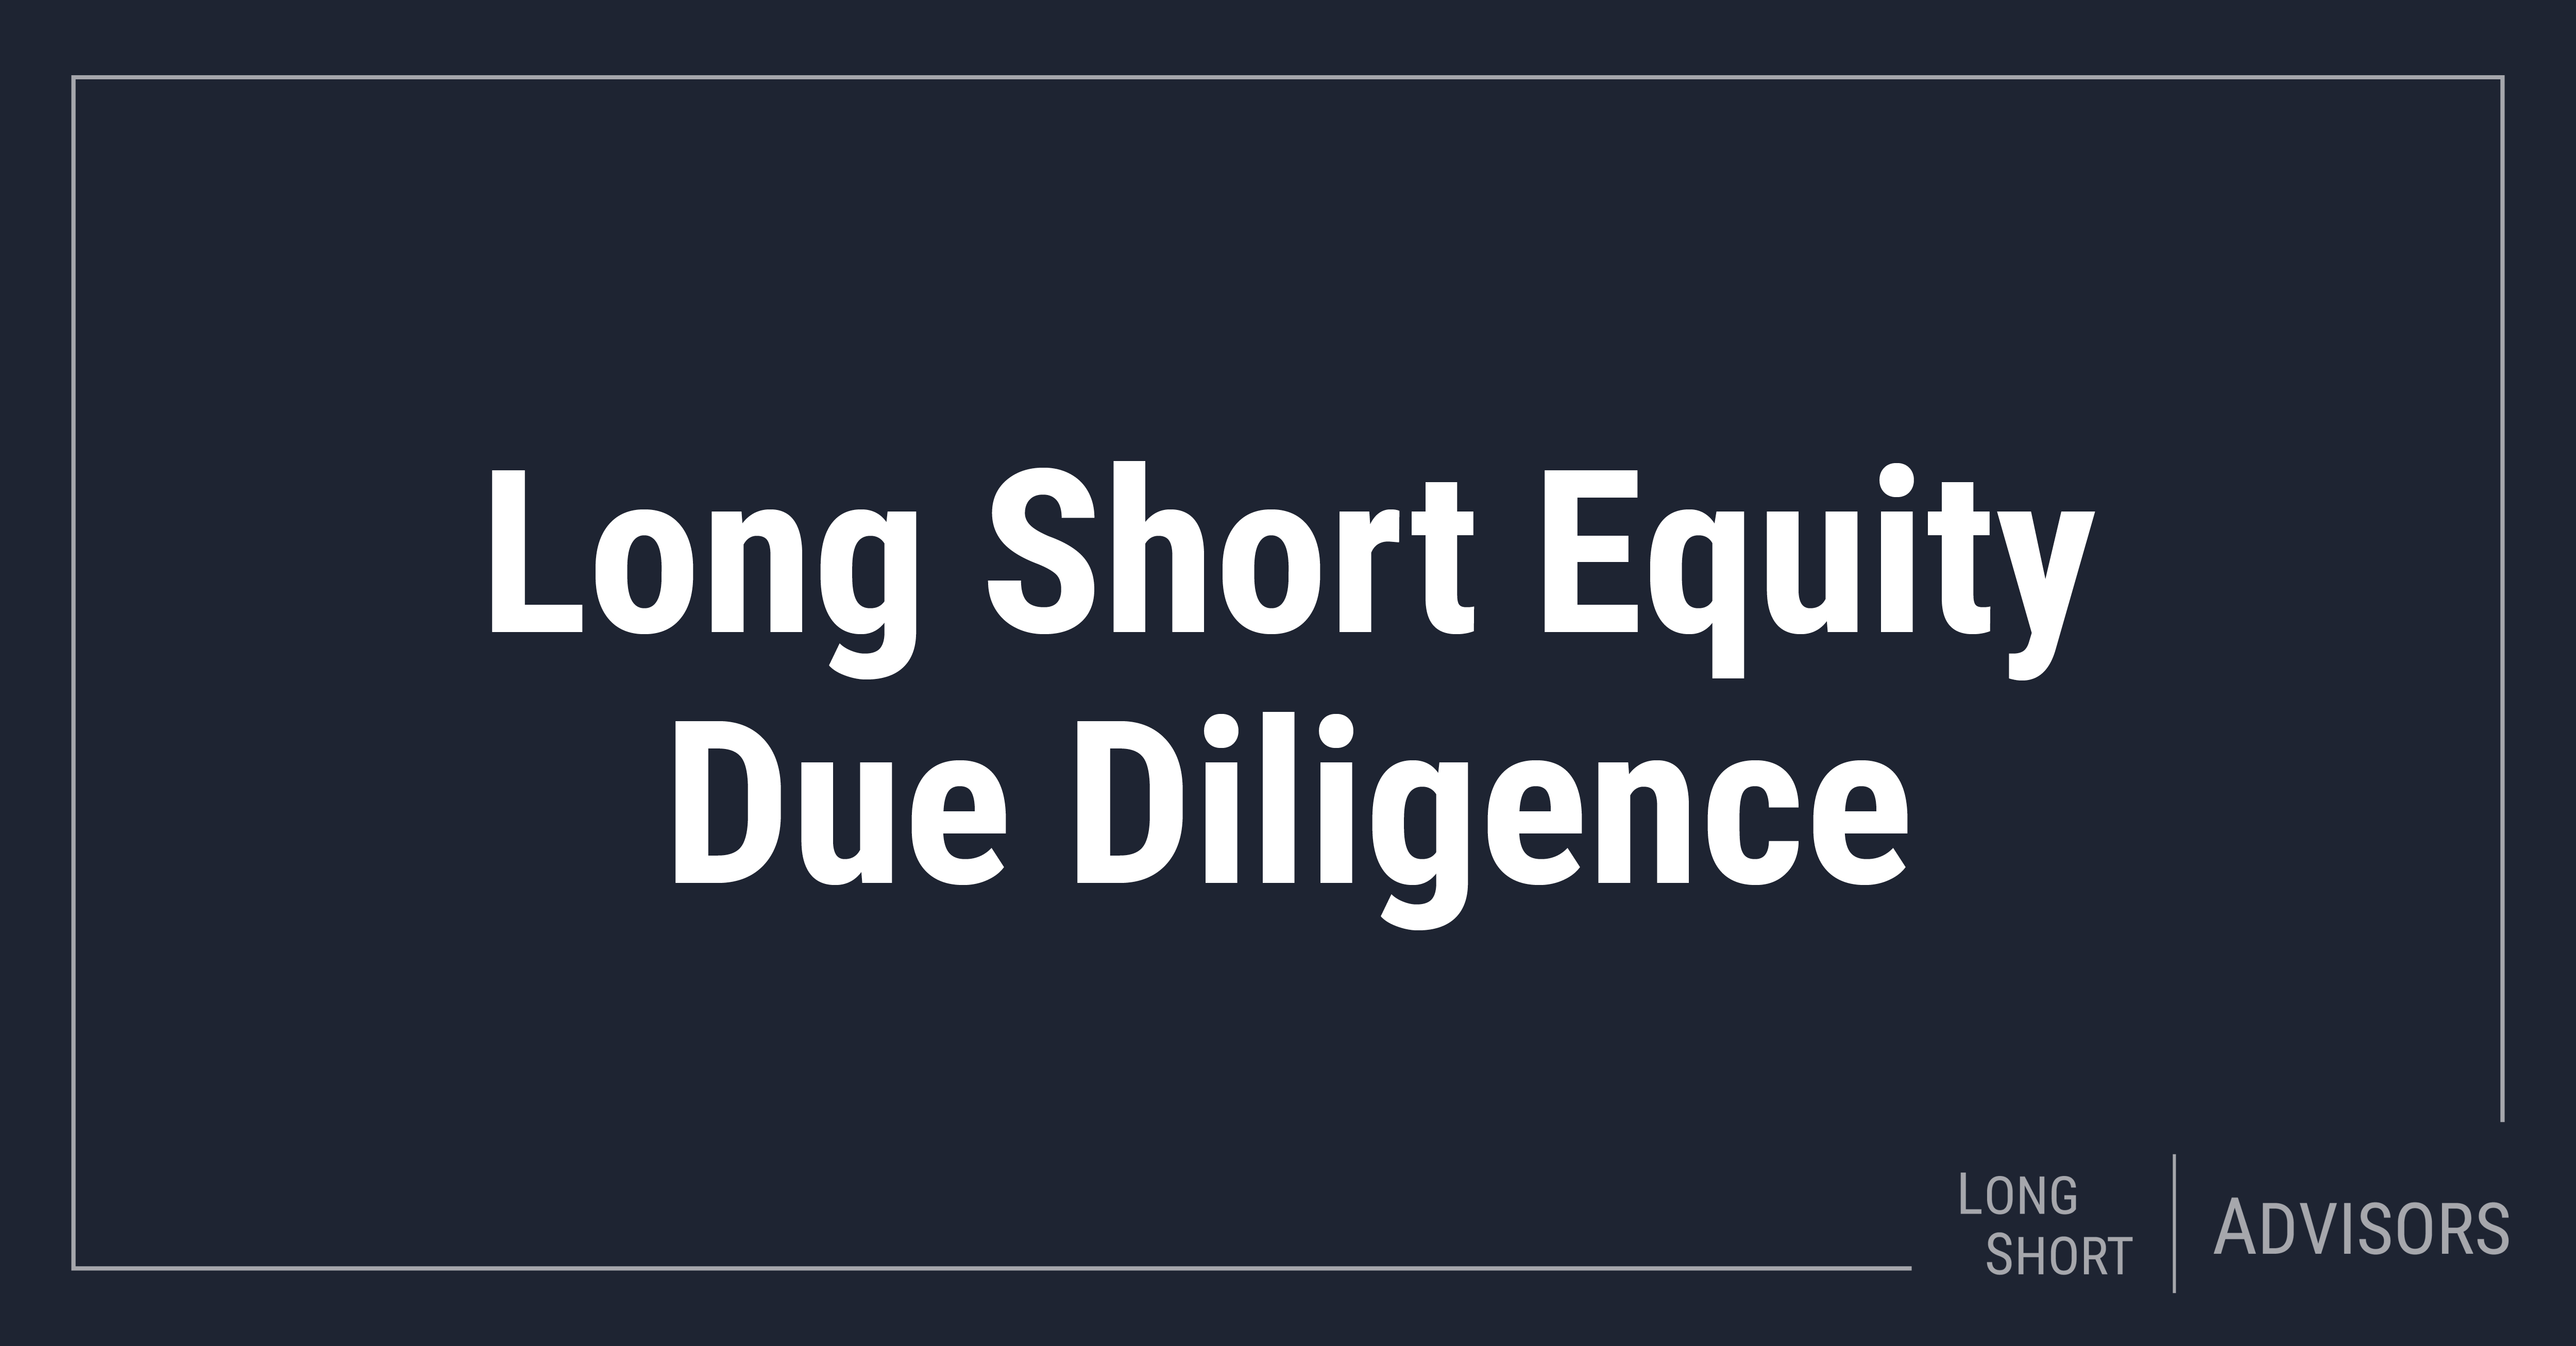 Long Short Equity Due Diligence